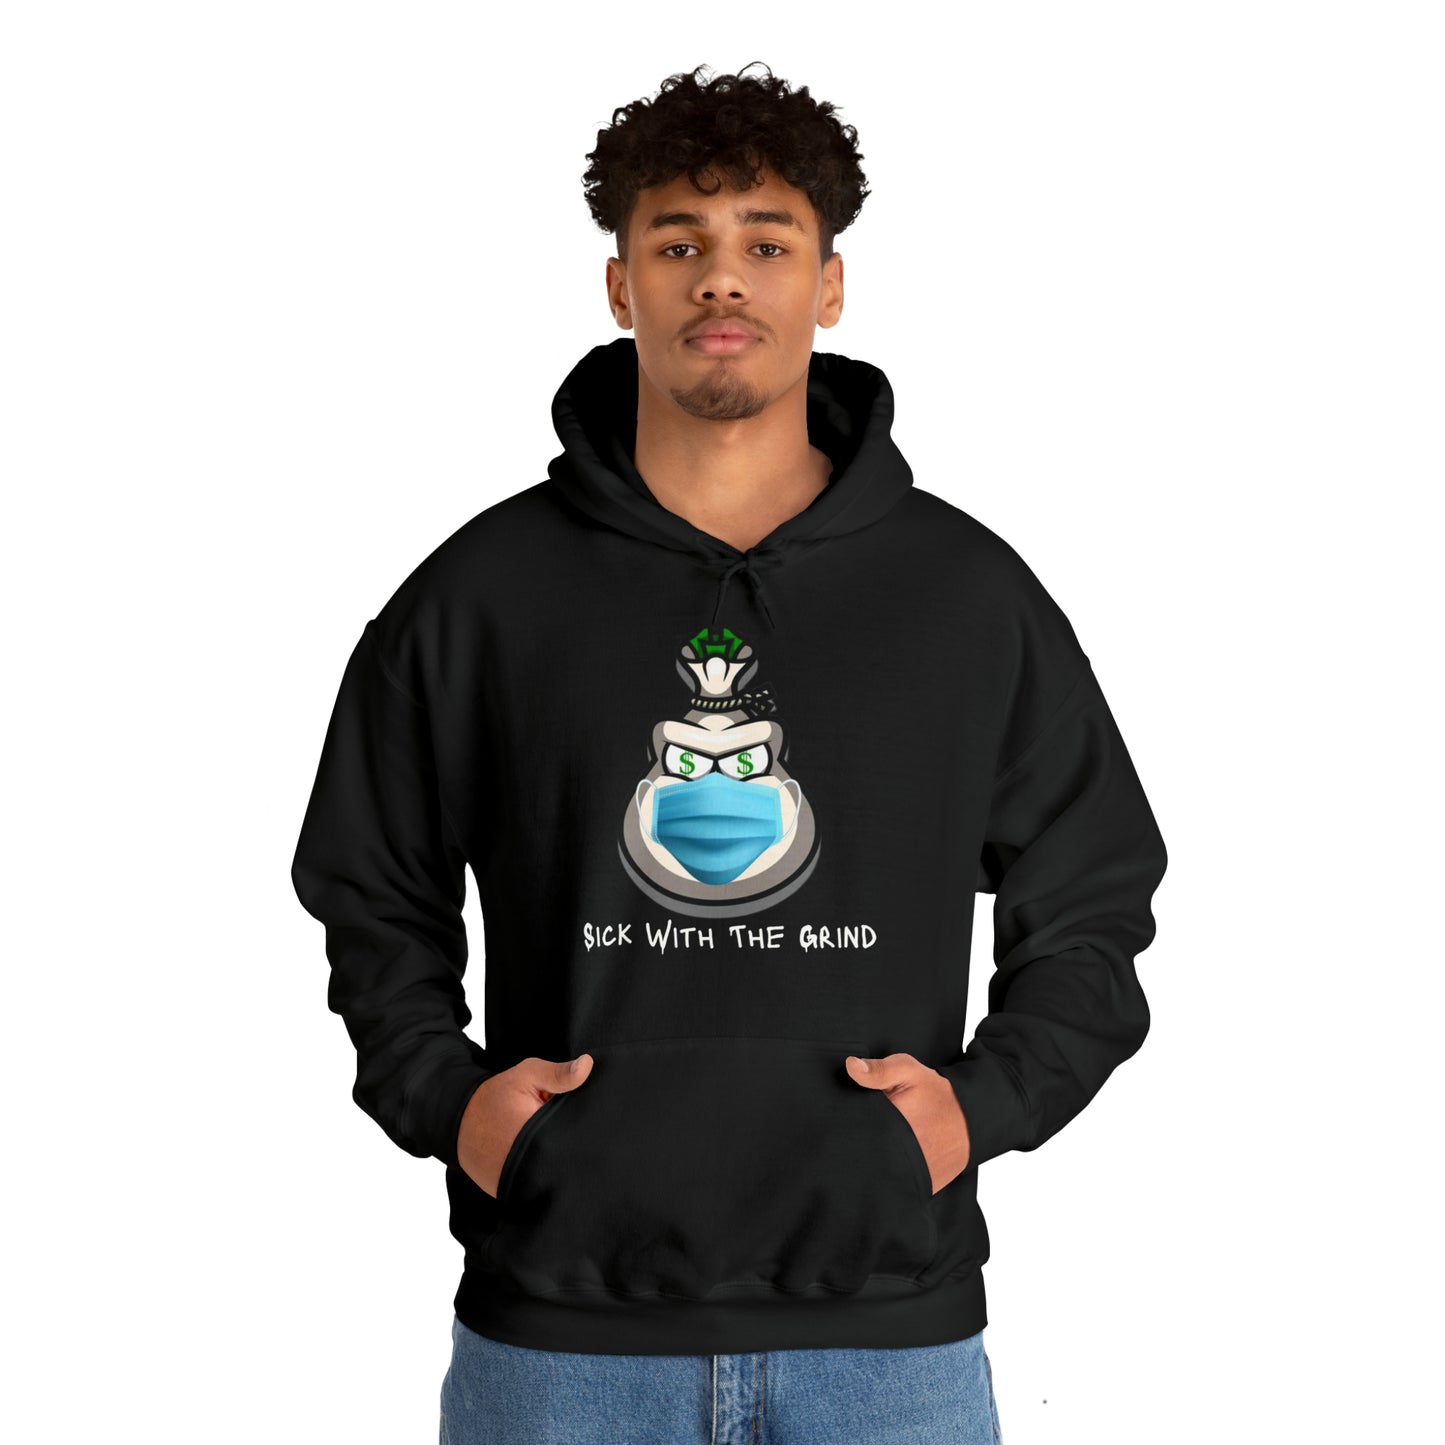 Sick With The Grind Unisex Heavy Blend™ Hooded Sweatshirt